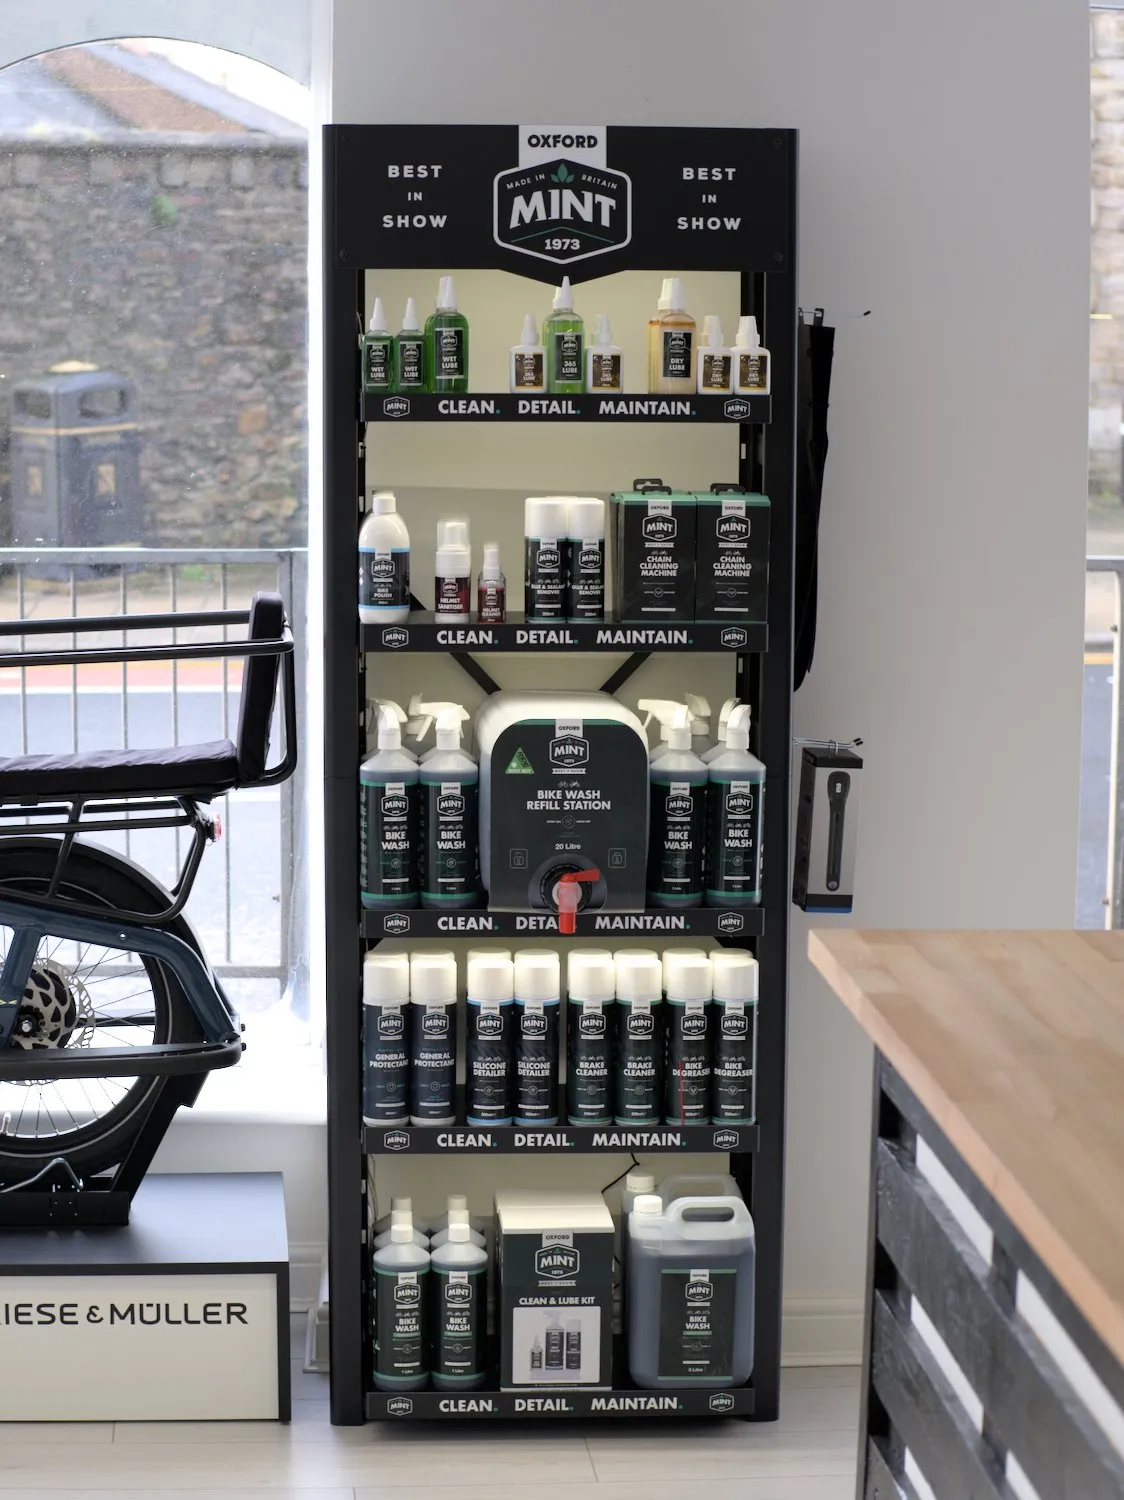 Delighted to have the new Oxford Products Mint stand up and running, packed with all sorts of bike maintenance goodies. And we’re very happy to be one of the first bike shops with a bike wash refill station to reduce plastic waste.